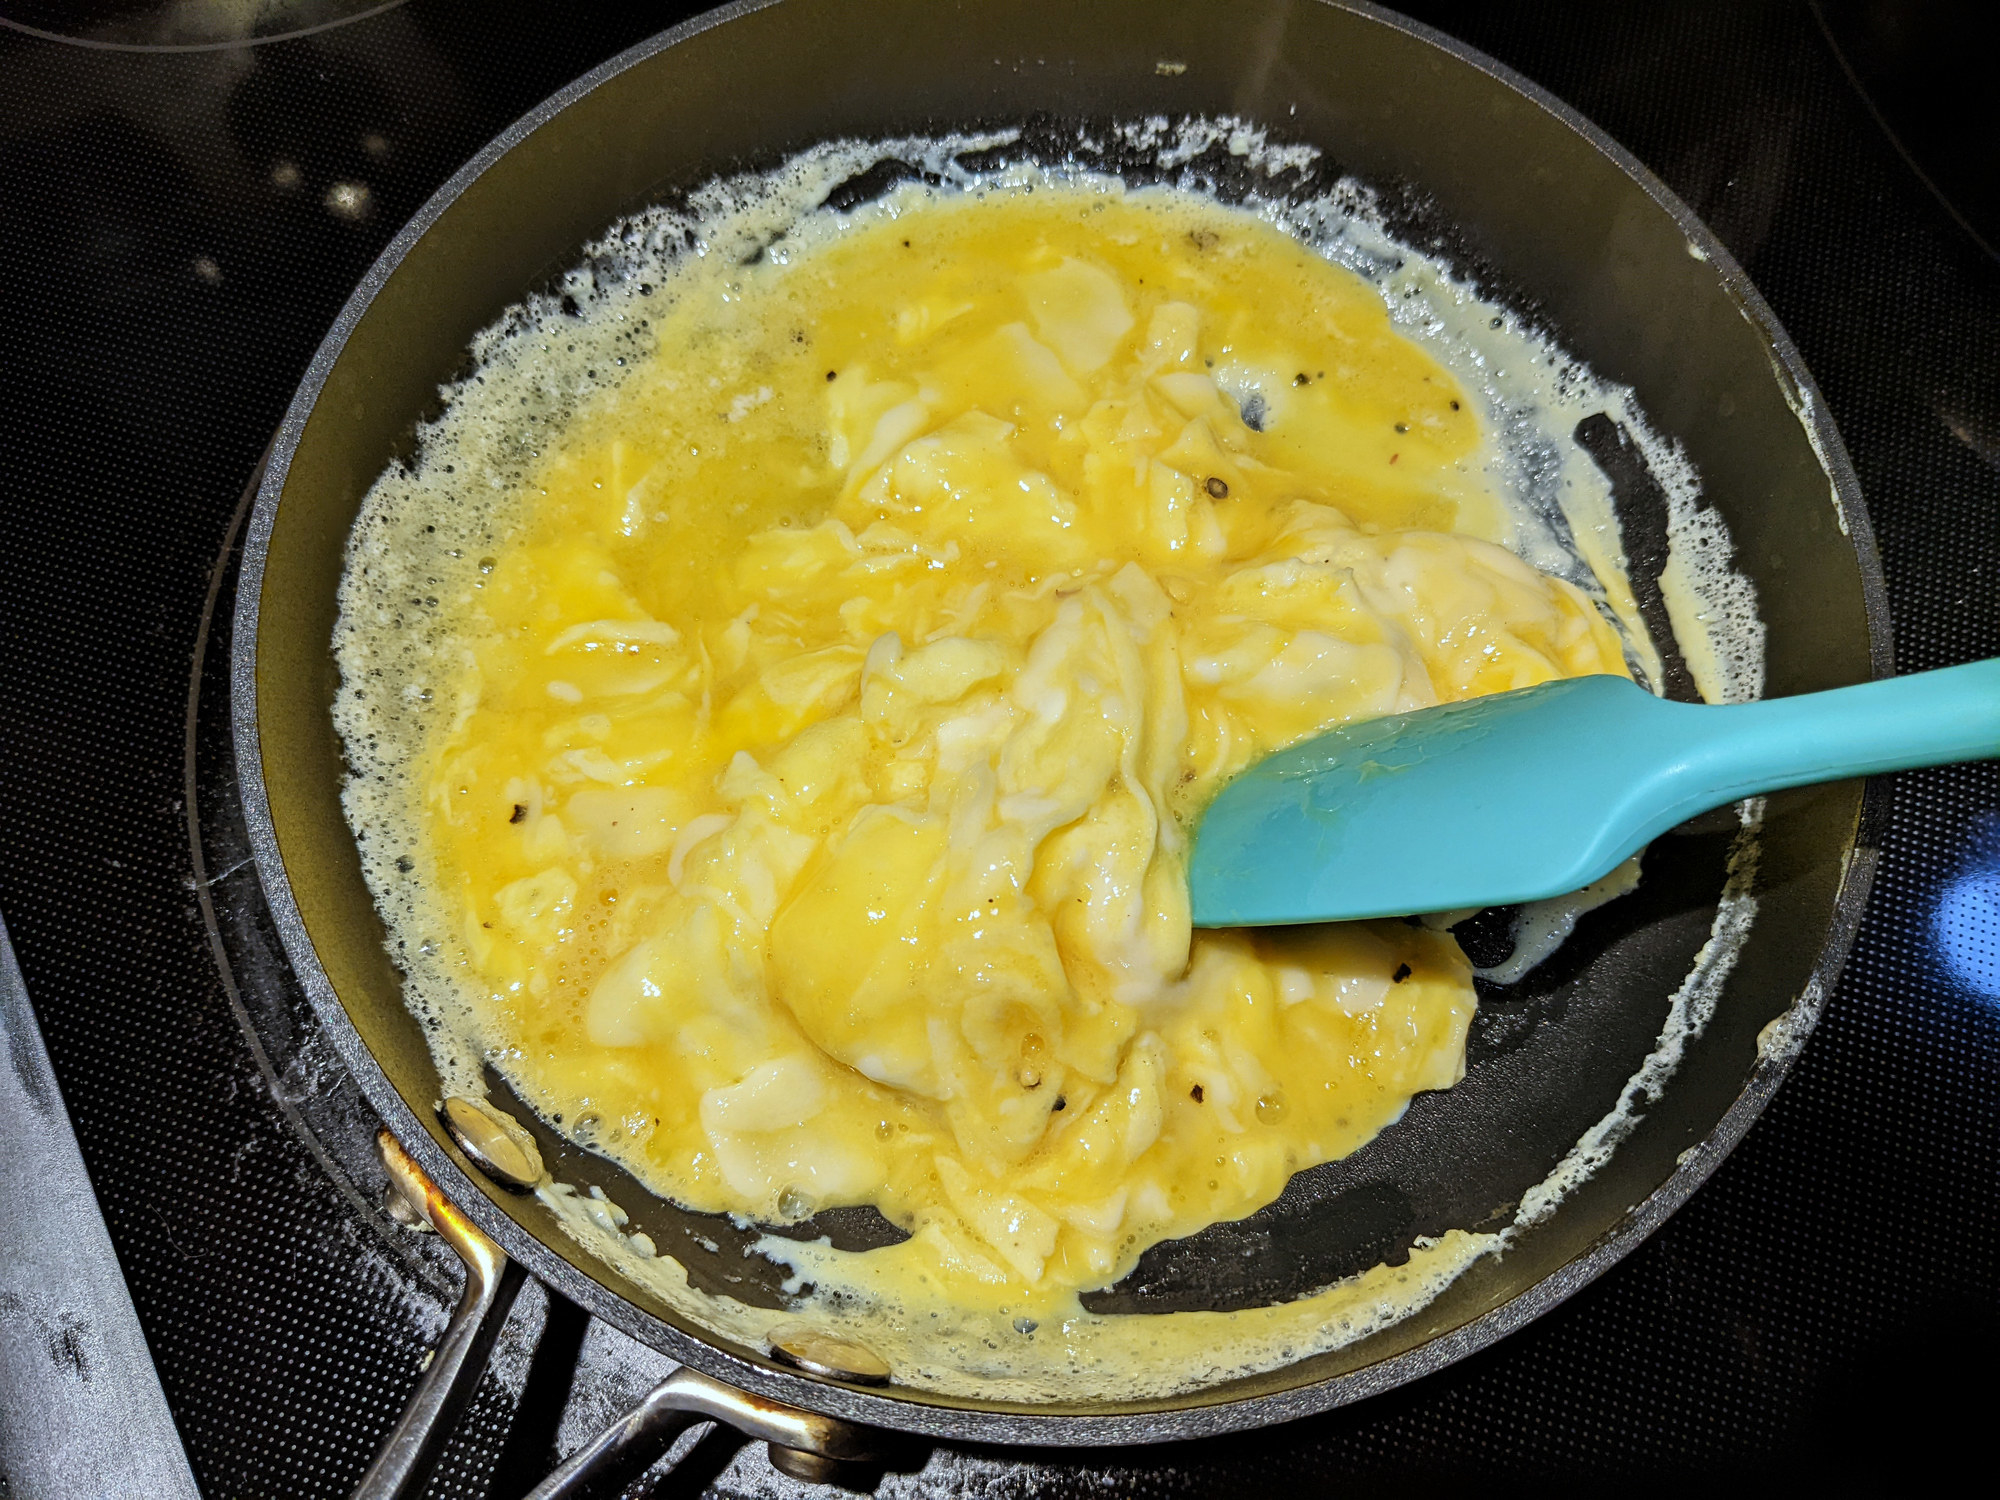 Scrambled eggs in a frying pan with spatula.